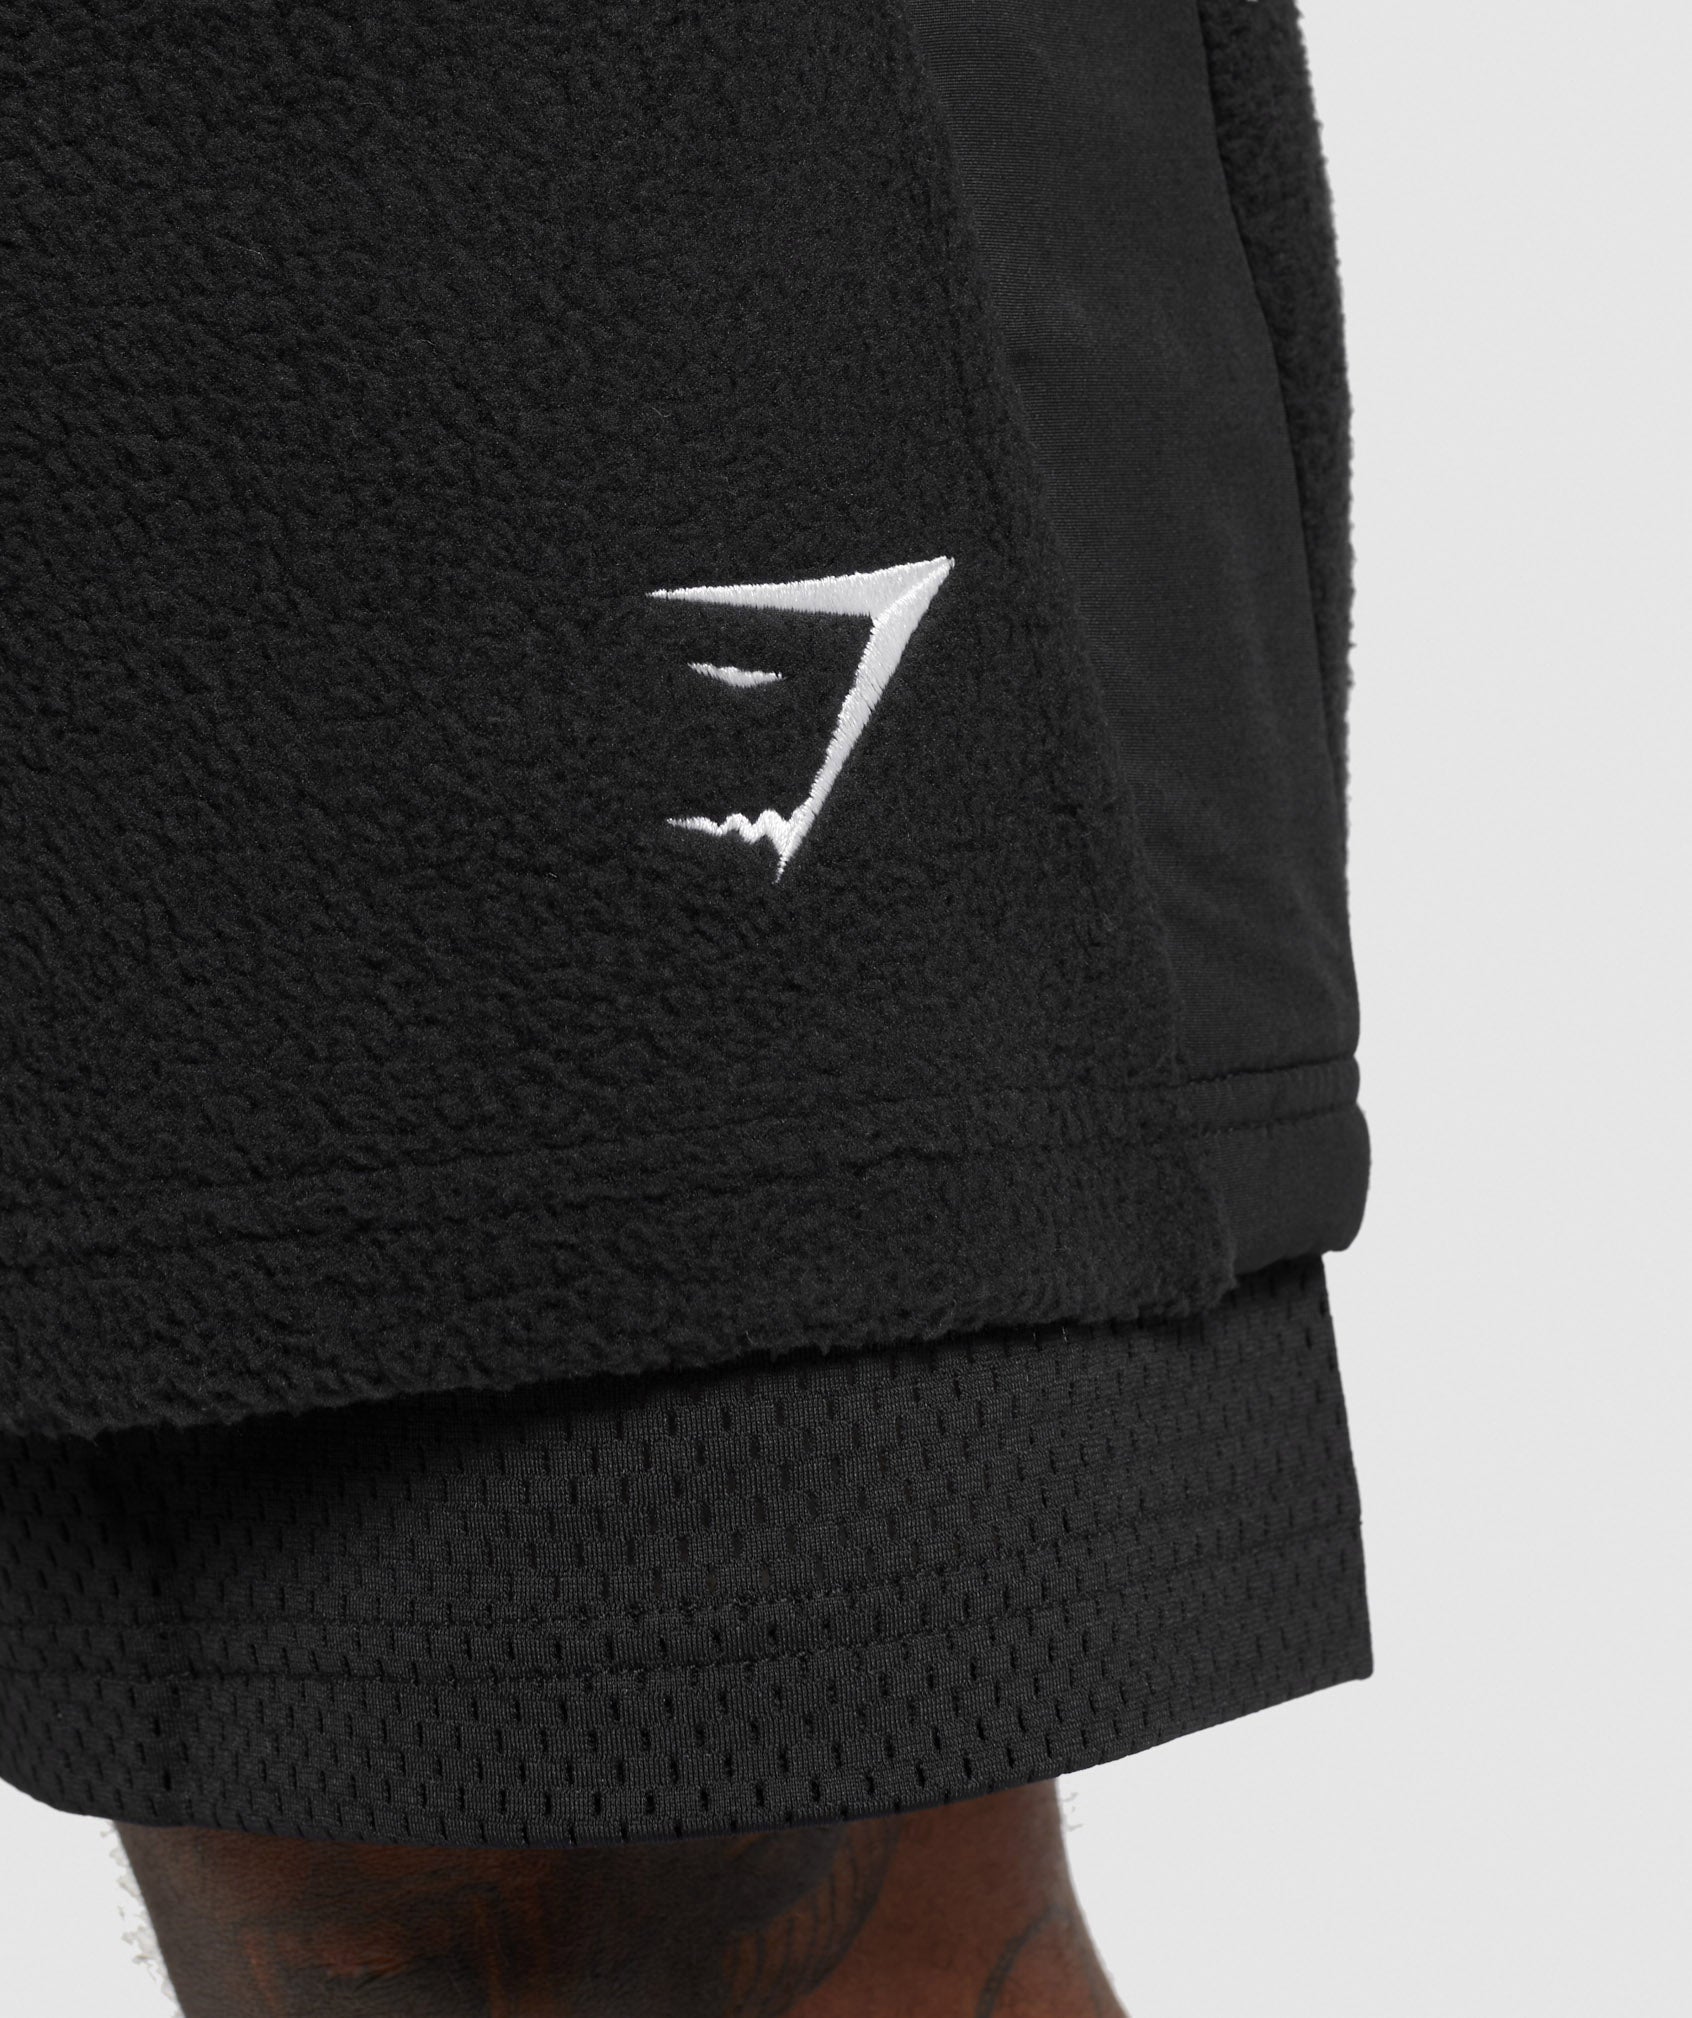 Vibes Shorts in Black - view 6